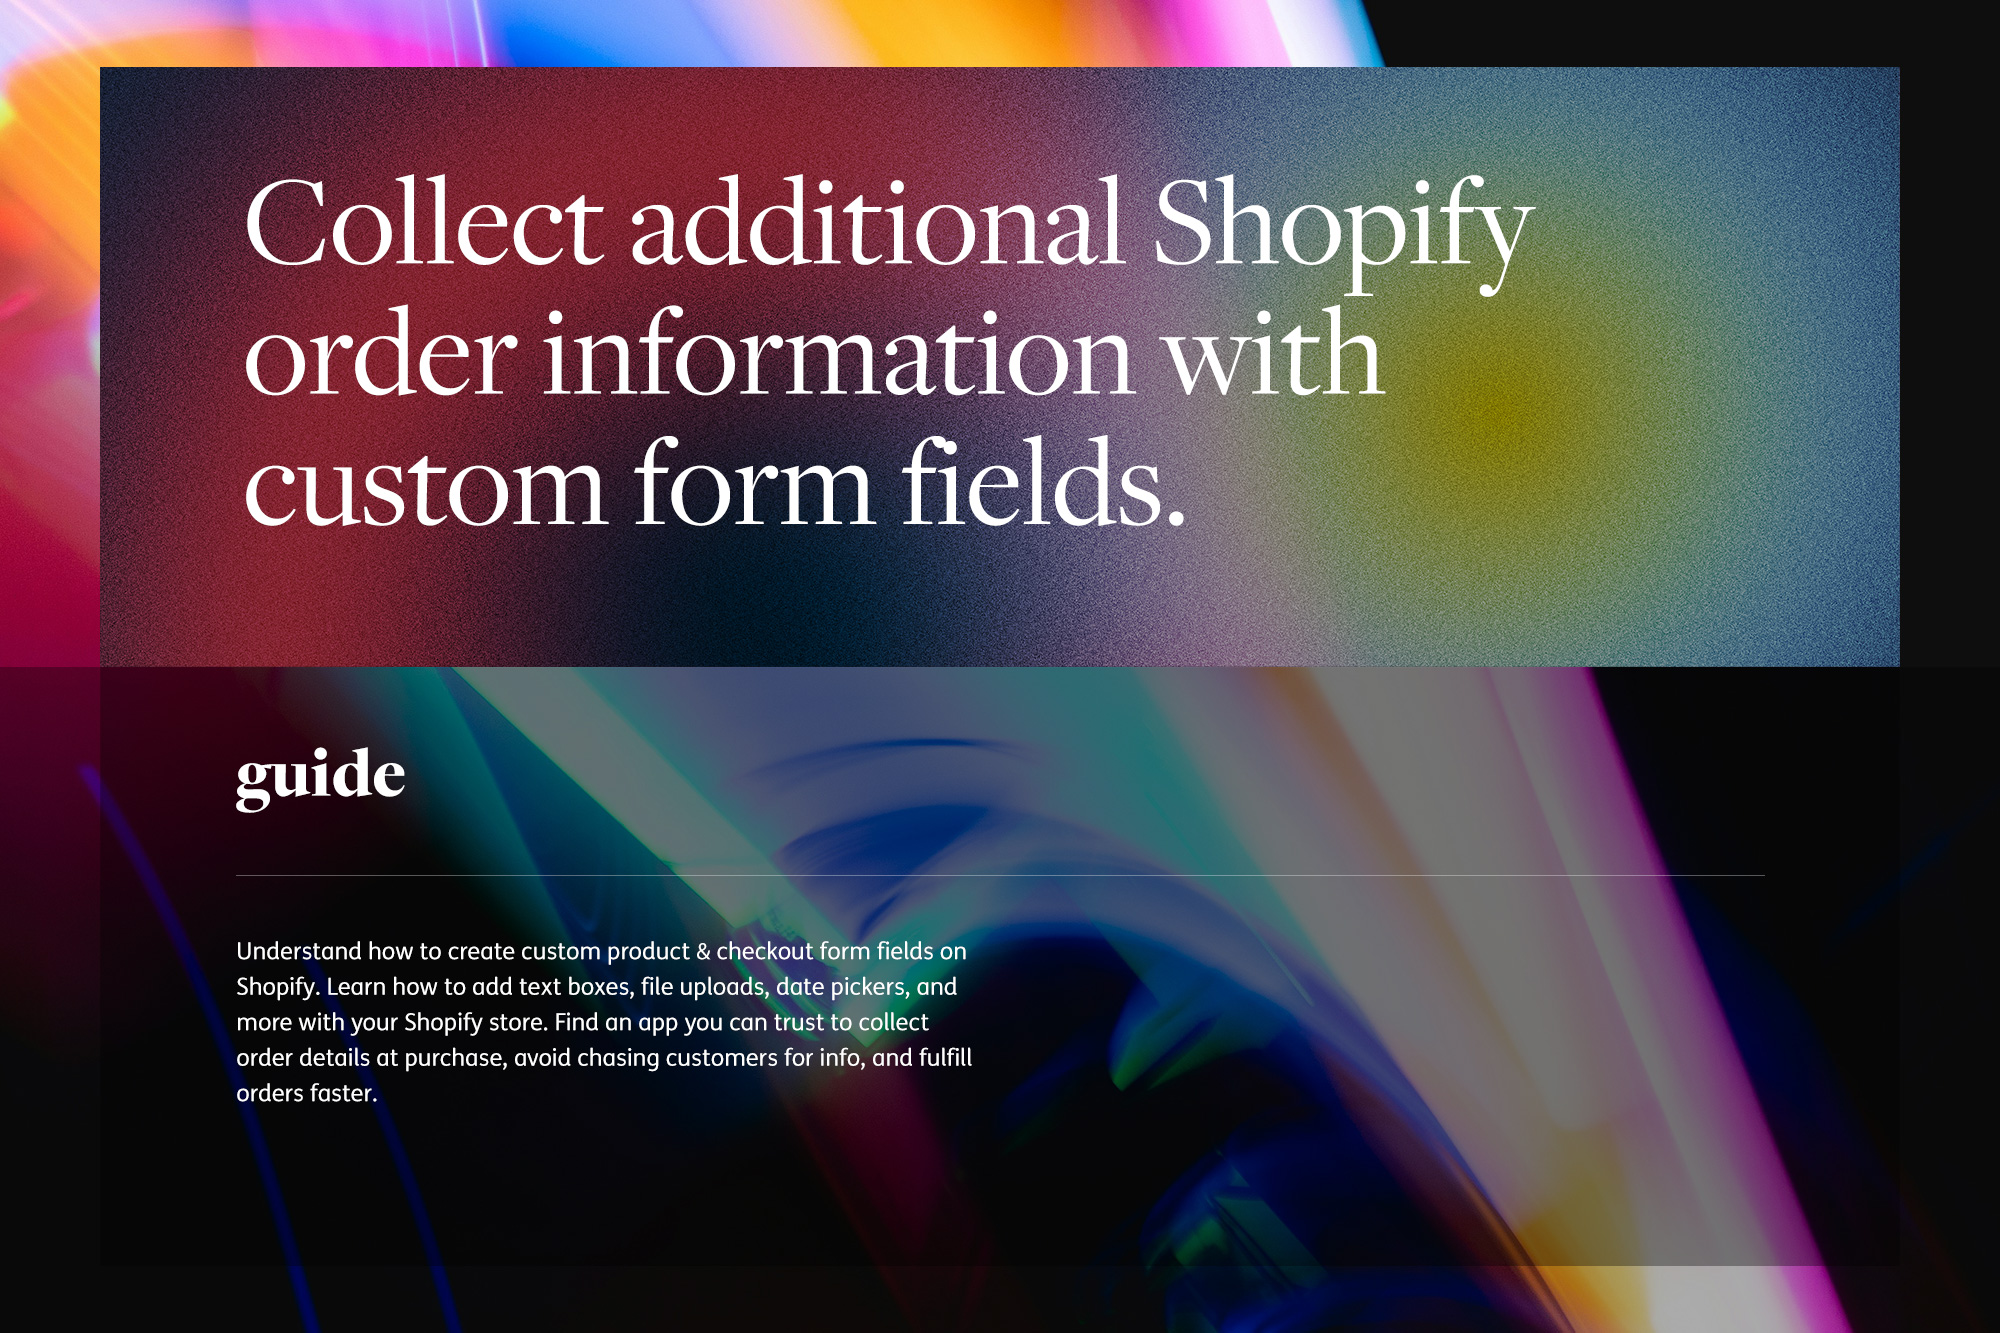 Collect additional Shopify order information with custom form fields.